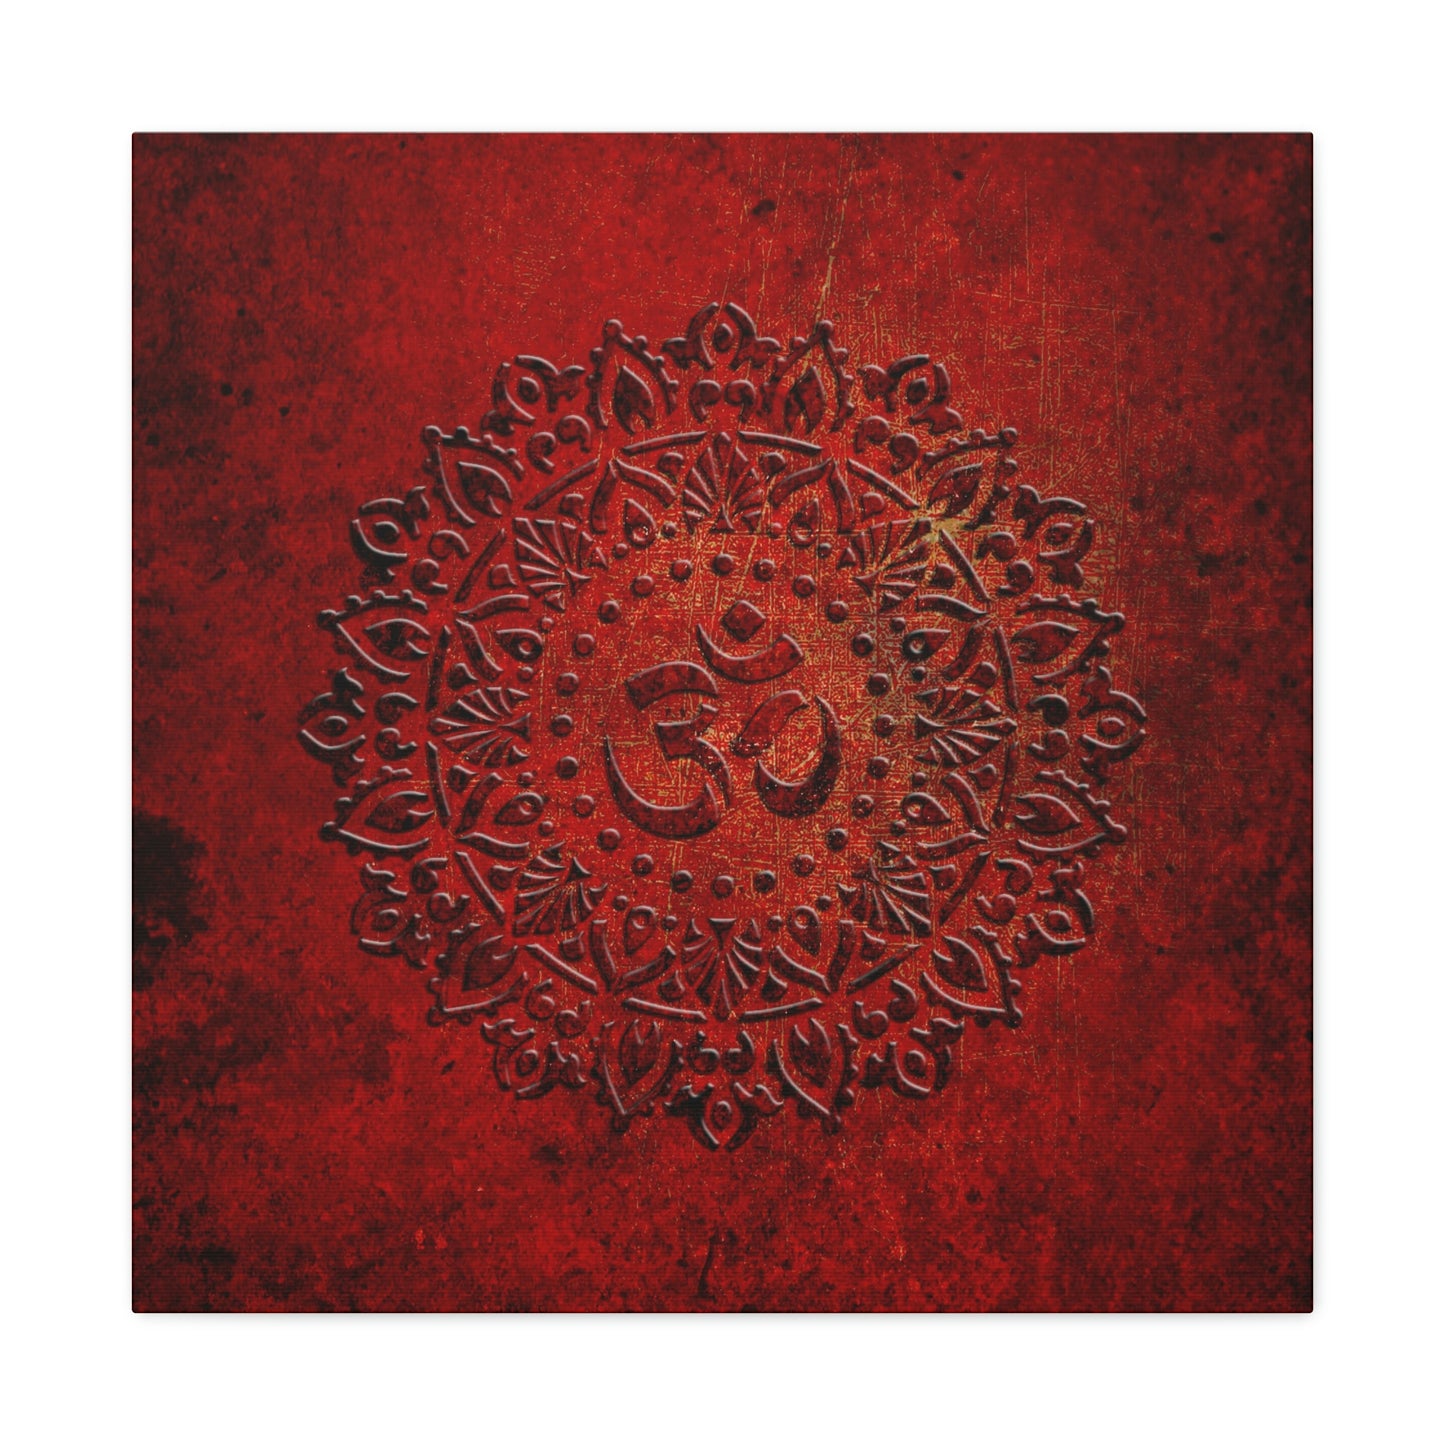 Om Symbol Mandala Style on Lava Red Background Printed on Unframed Stretched Canvas.